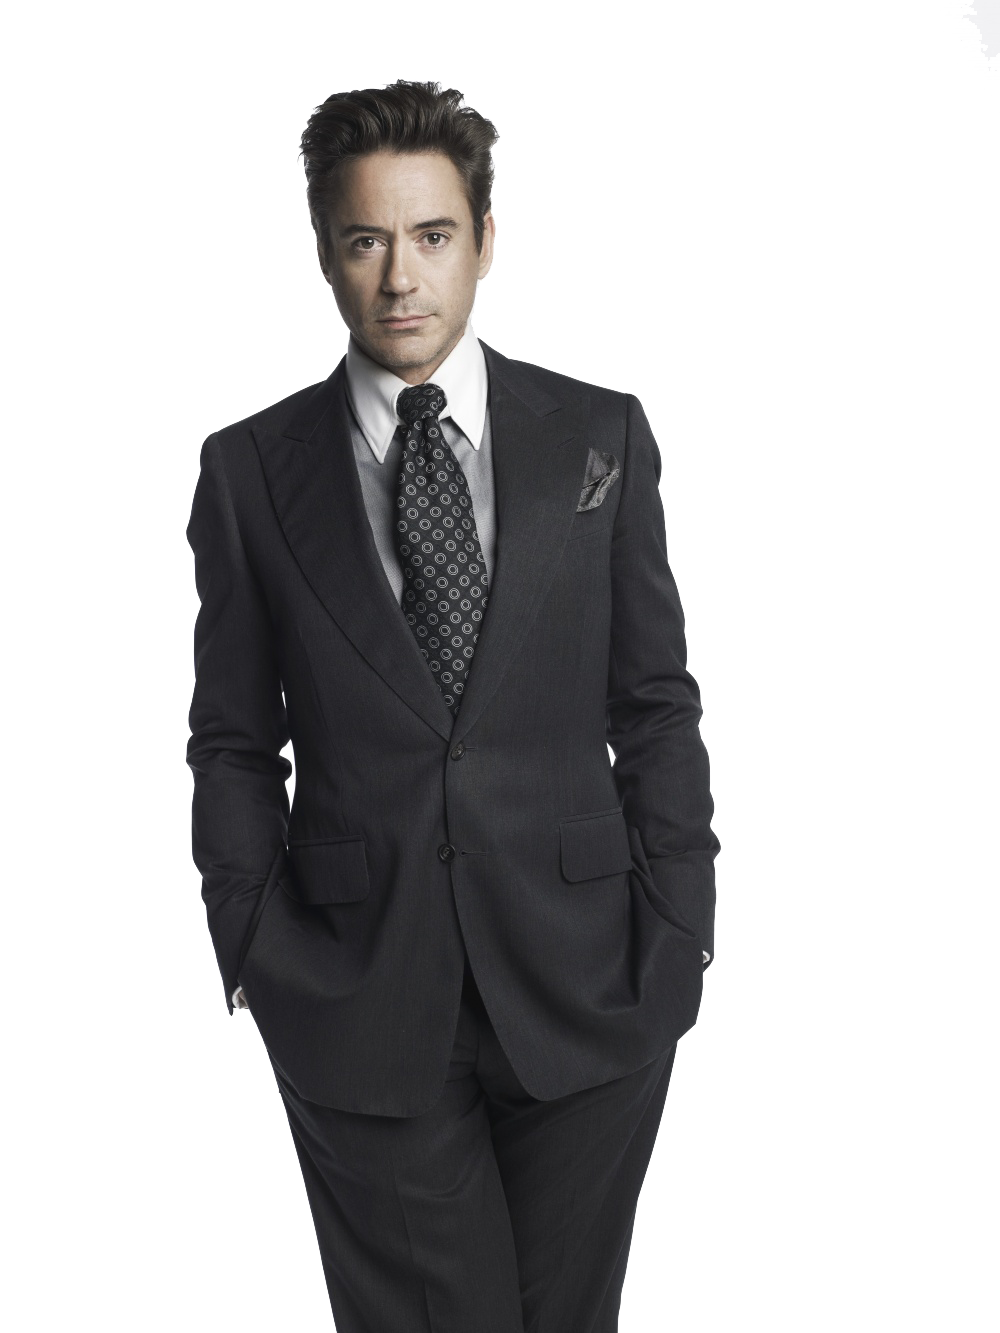 Robert Downey Jr PNG Pic Background